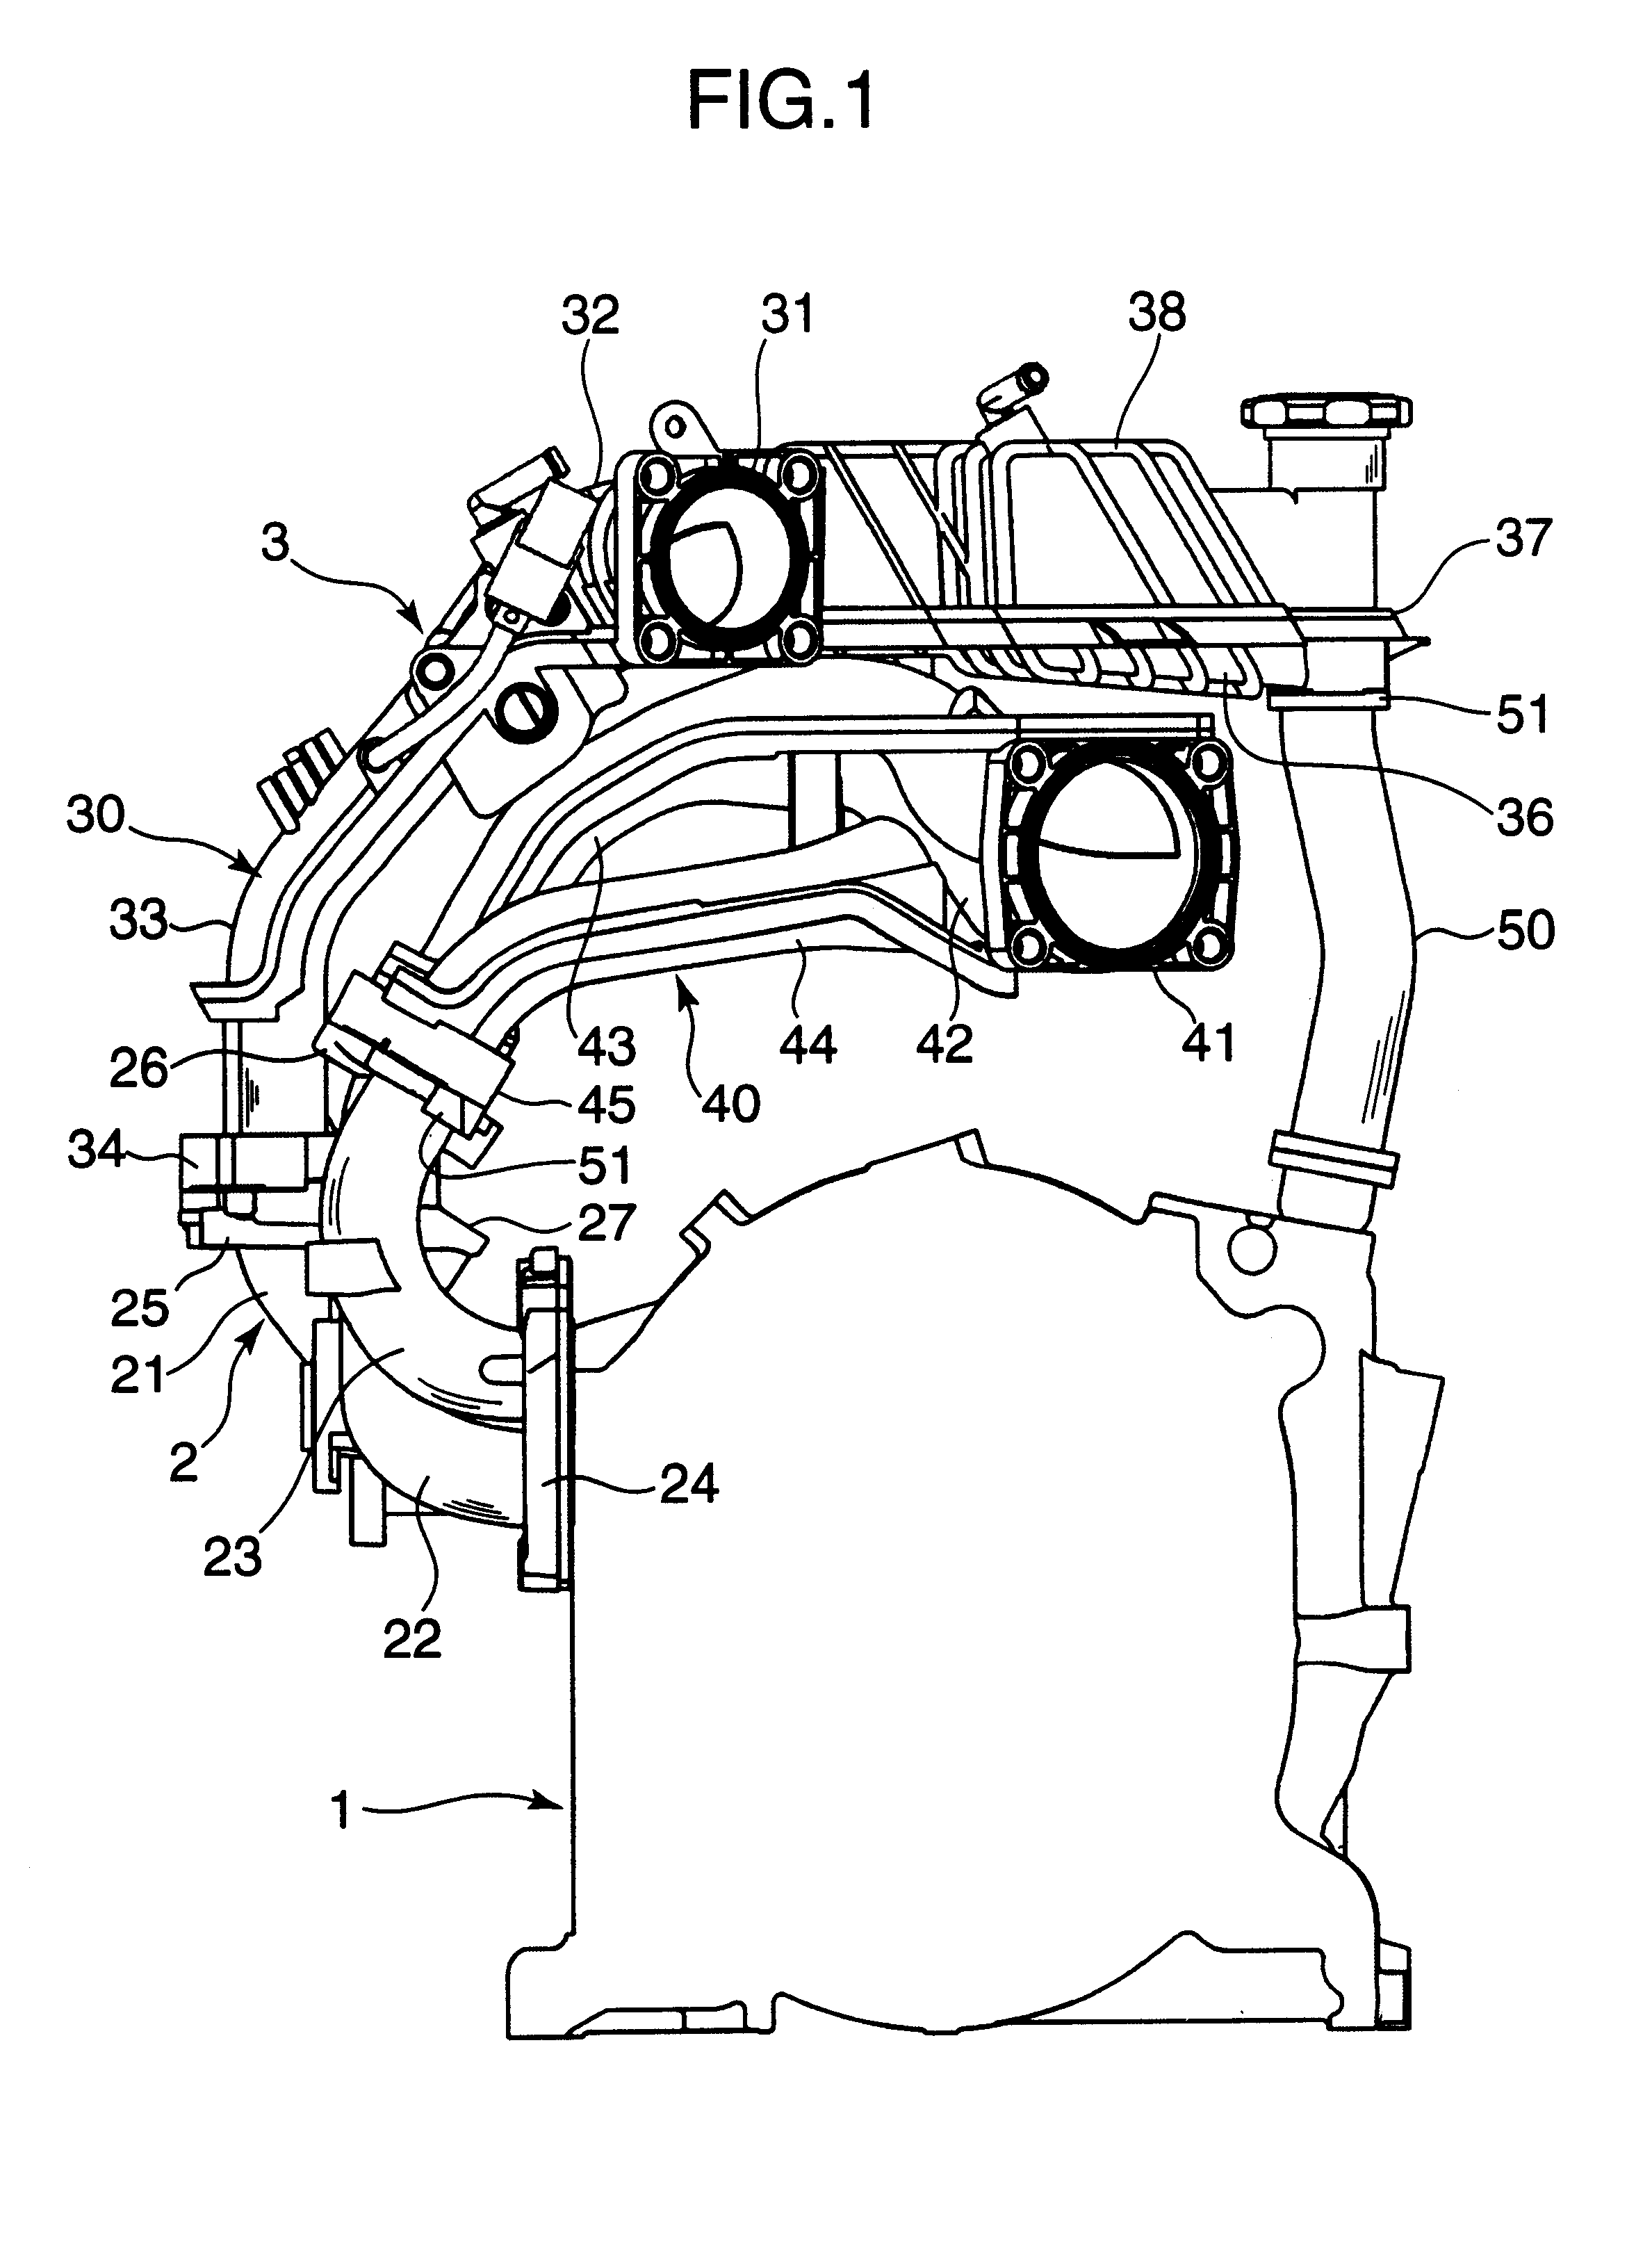 Intake system of an engine